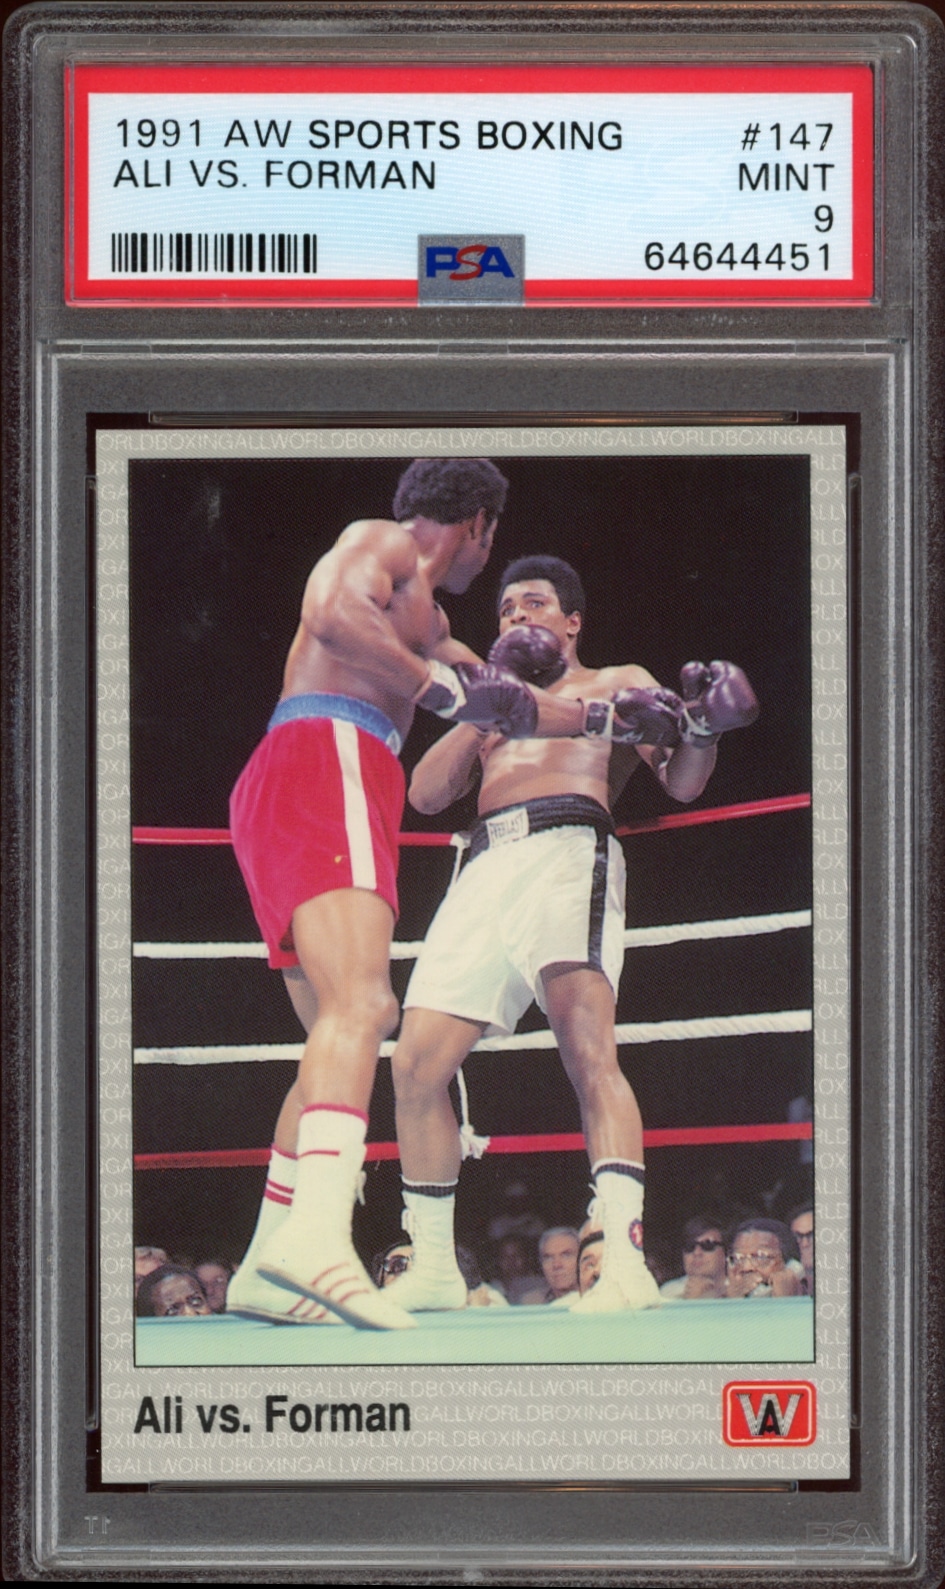 PSA 9 graded 1991 AW Sports Boxing card featuring Ali vs. Foreman match.